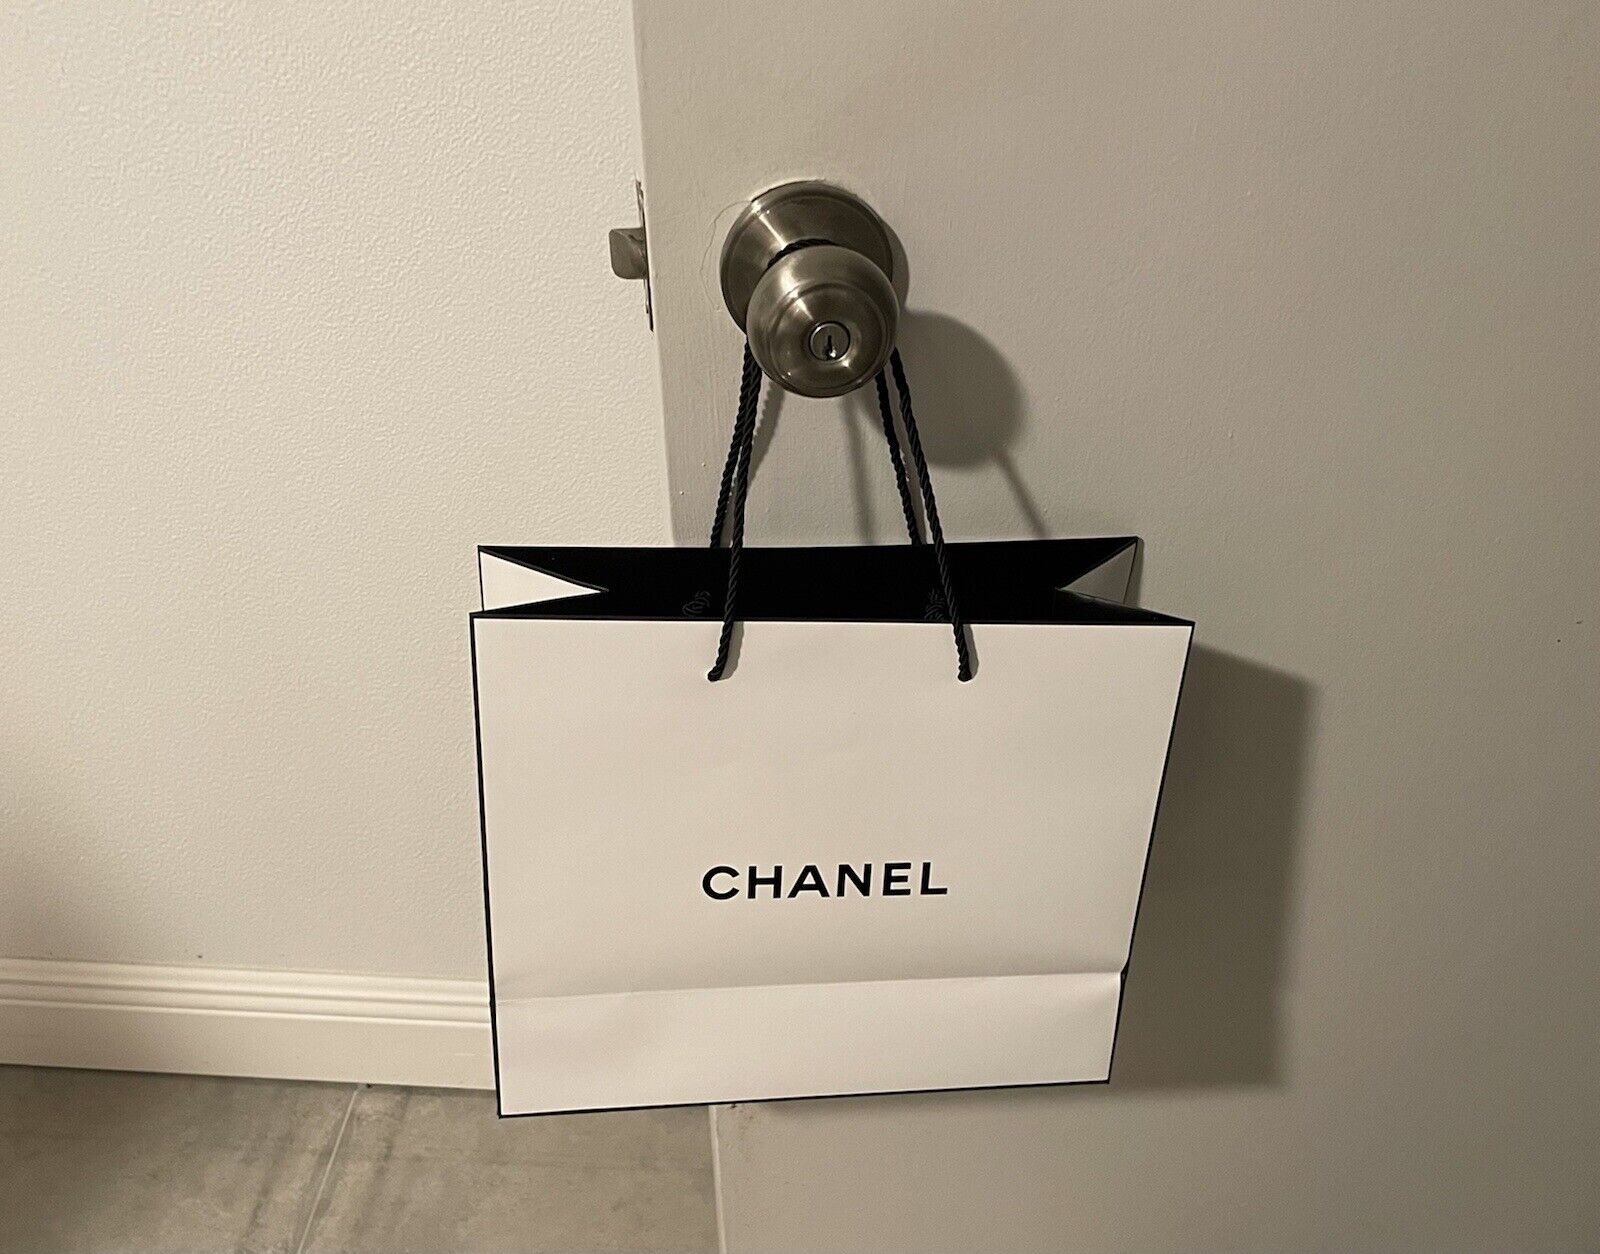 CHANEL Signature Large White Paper Gift  Bag Lot of 12 - 11”X9.75”X4.75”